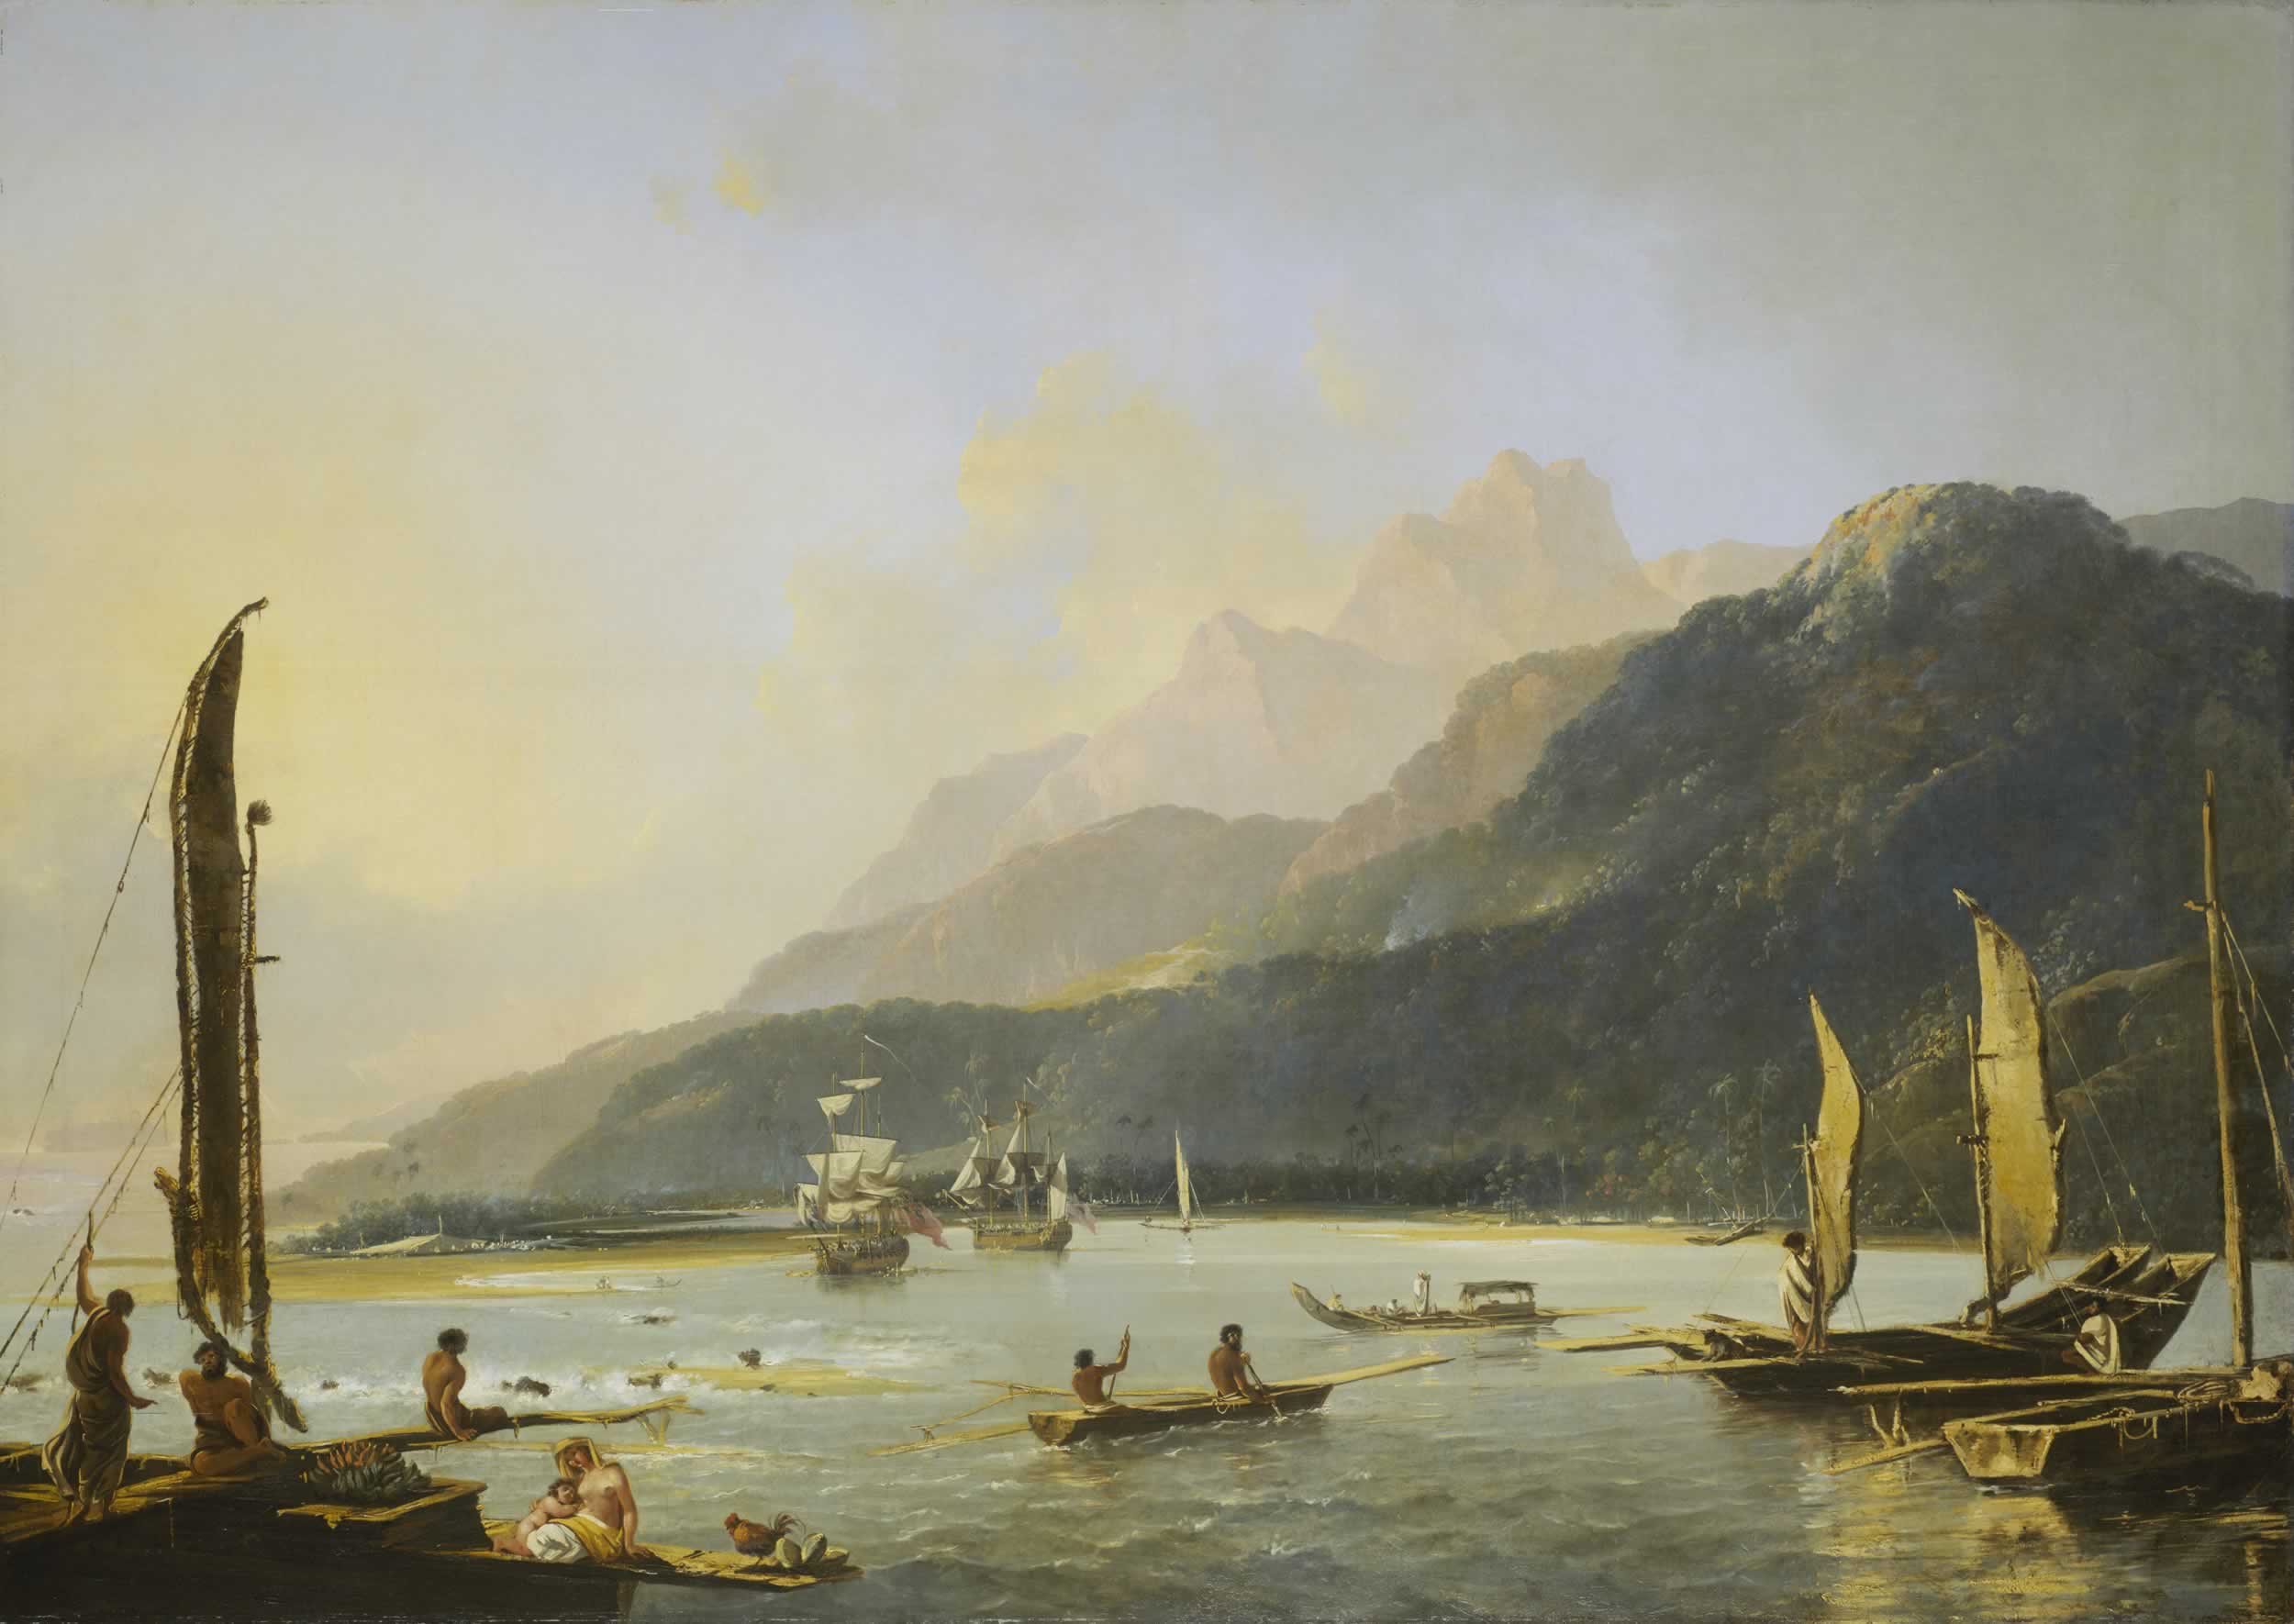 Matavai Bay, Tahiti, as painted by William Hodges in 1776